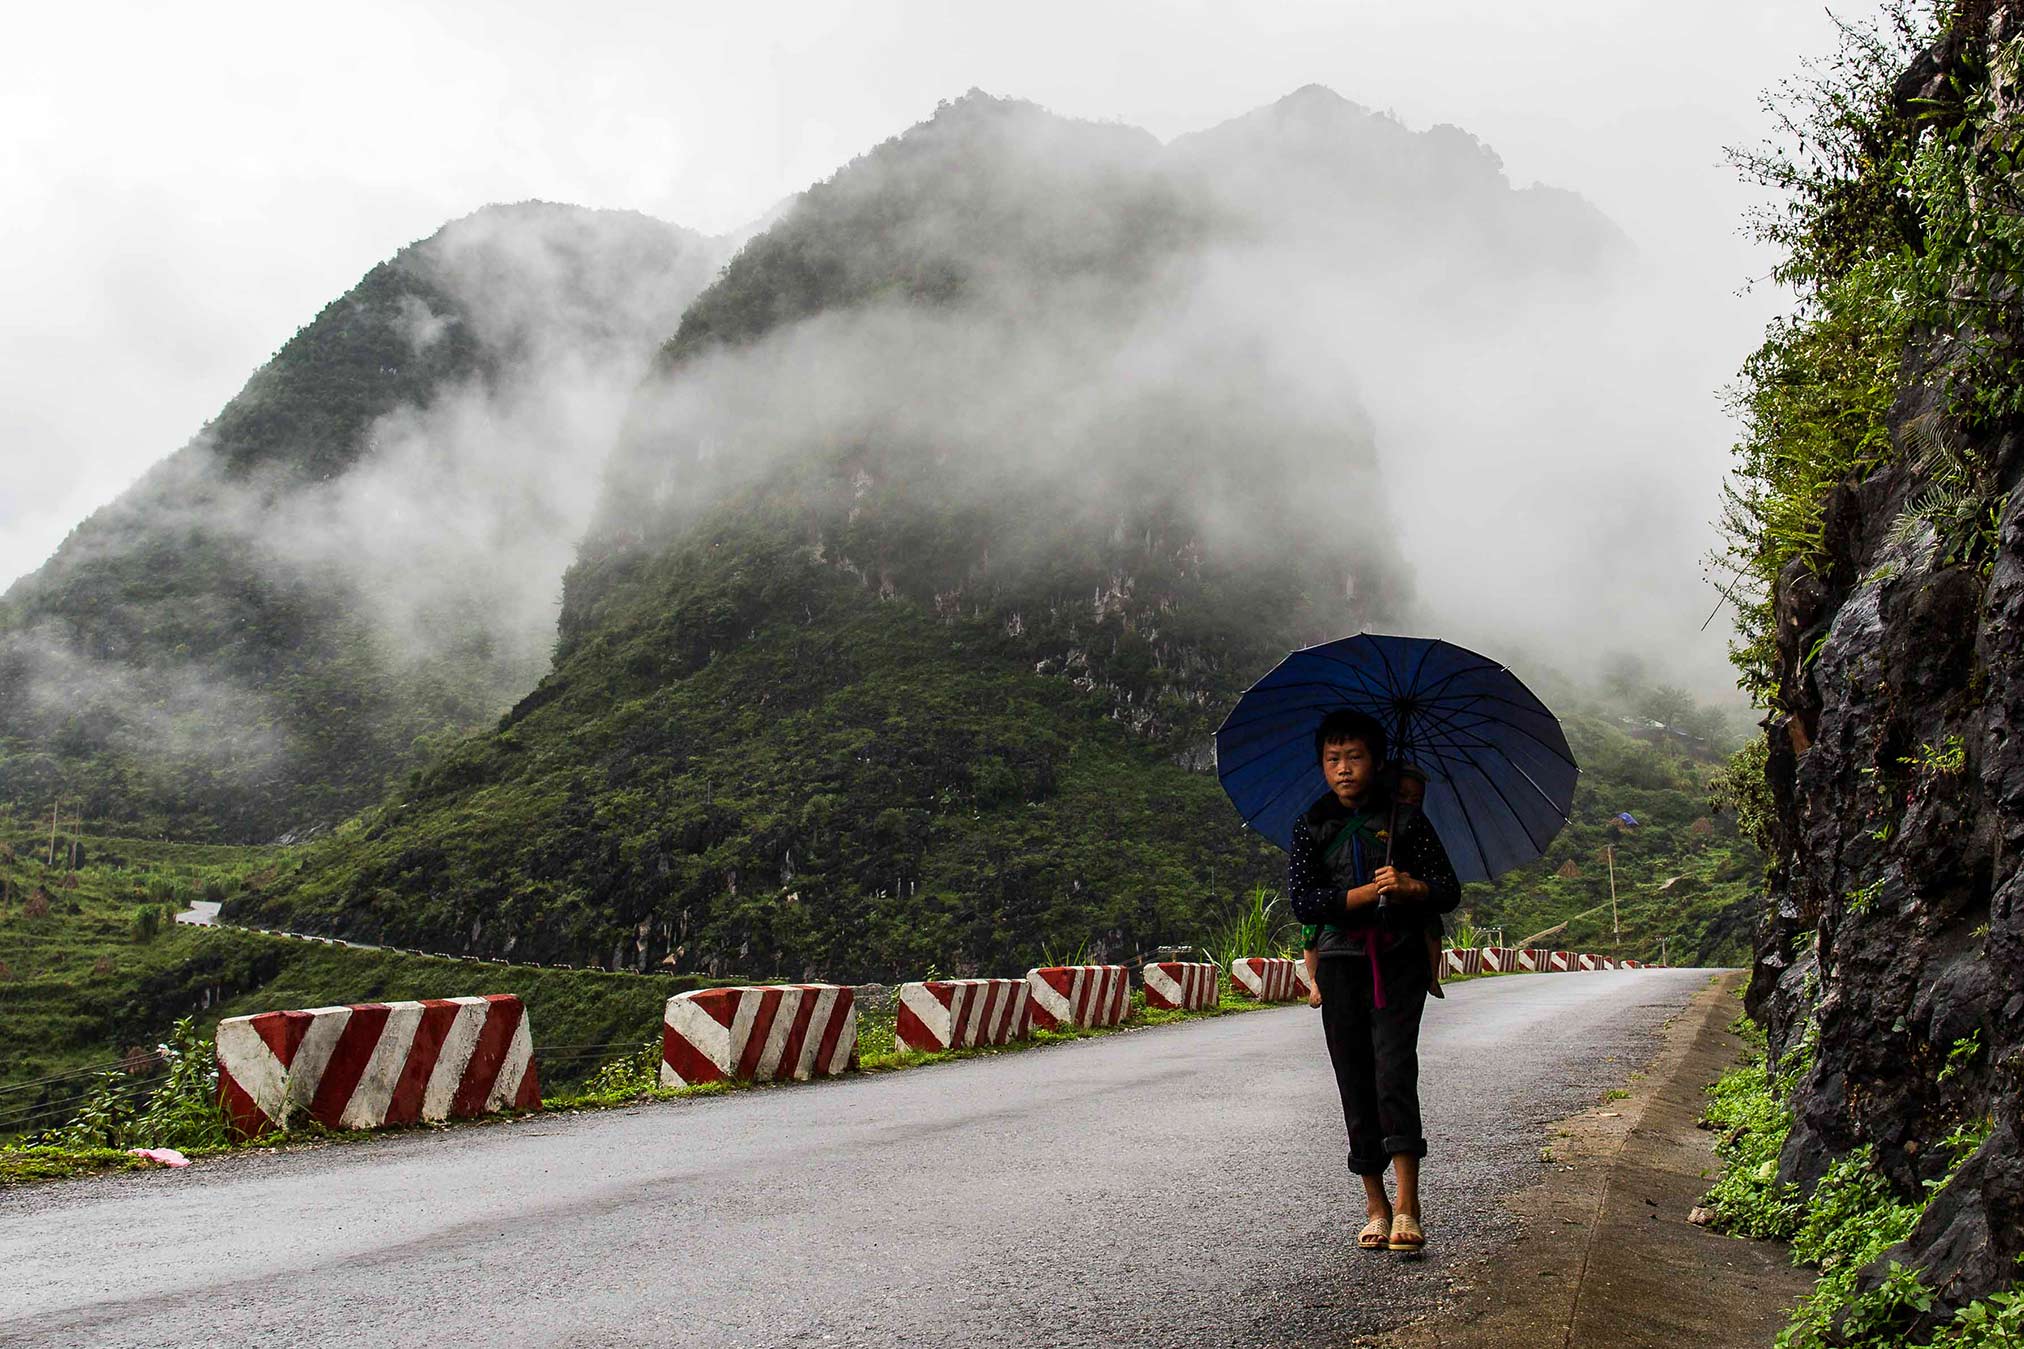 Young Hmong woman walking on the road sheltering her child with a big blue umbrella